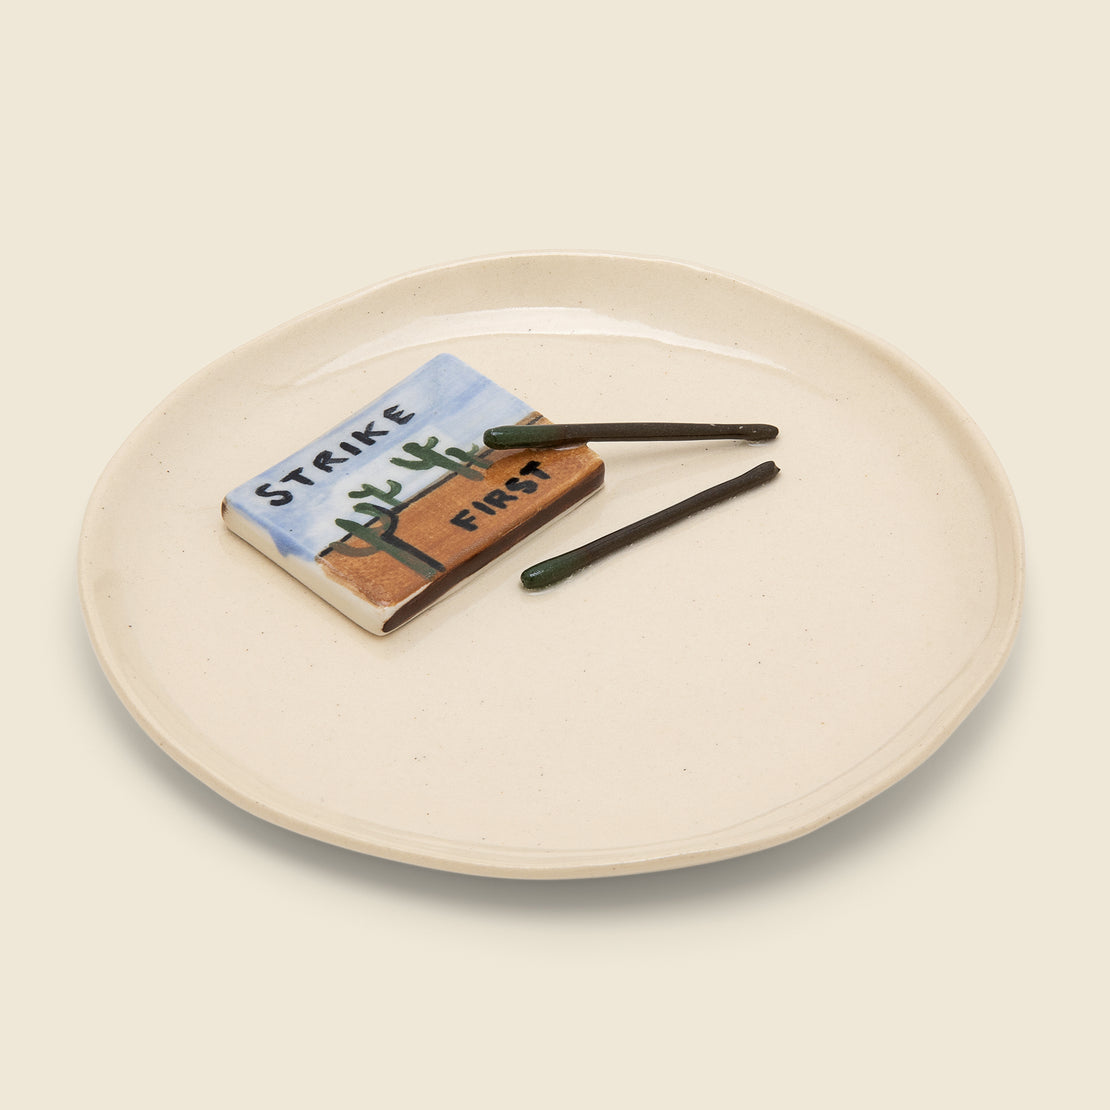 Small Plate - Strike First Matches - Home - STAG Provisions - Home - Art & Accessories - Tray